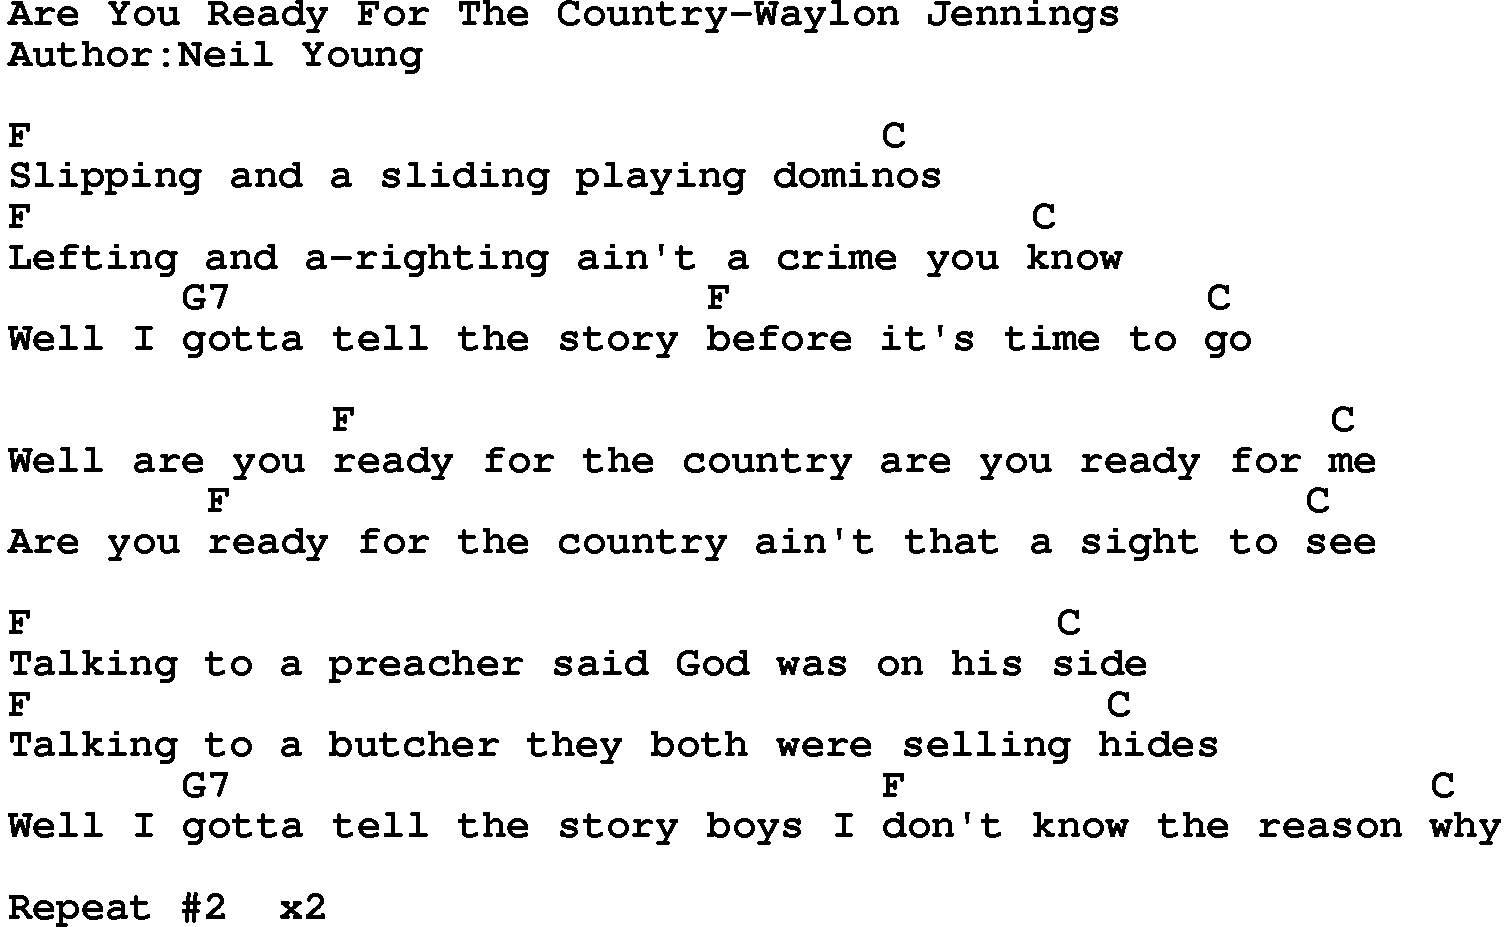 Country music song: Are You Ready For The Country-Waylon Jennings lyrics and chords